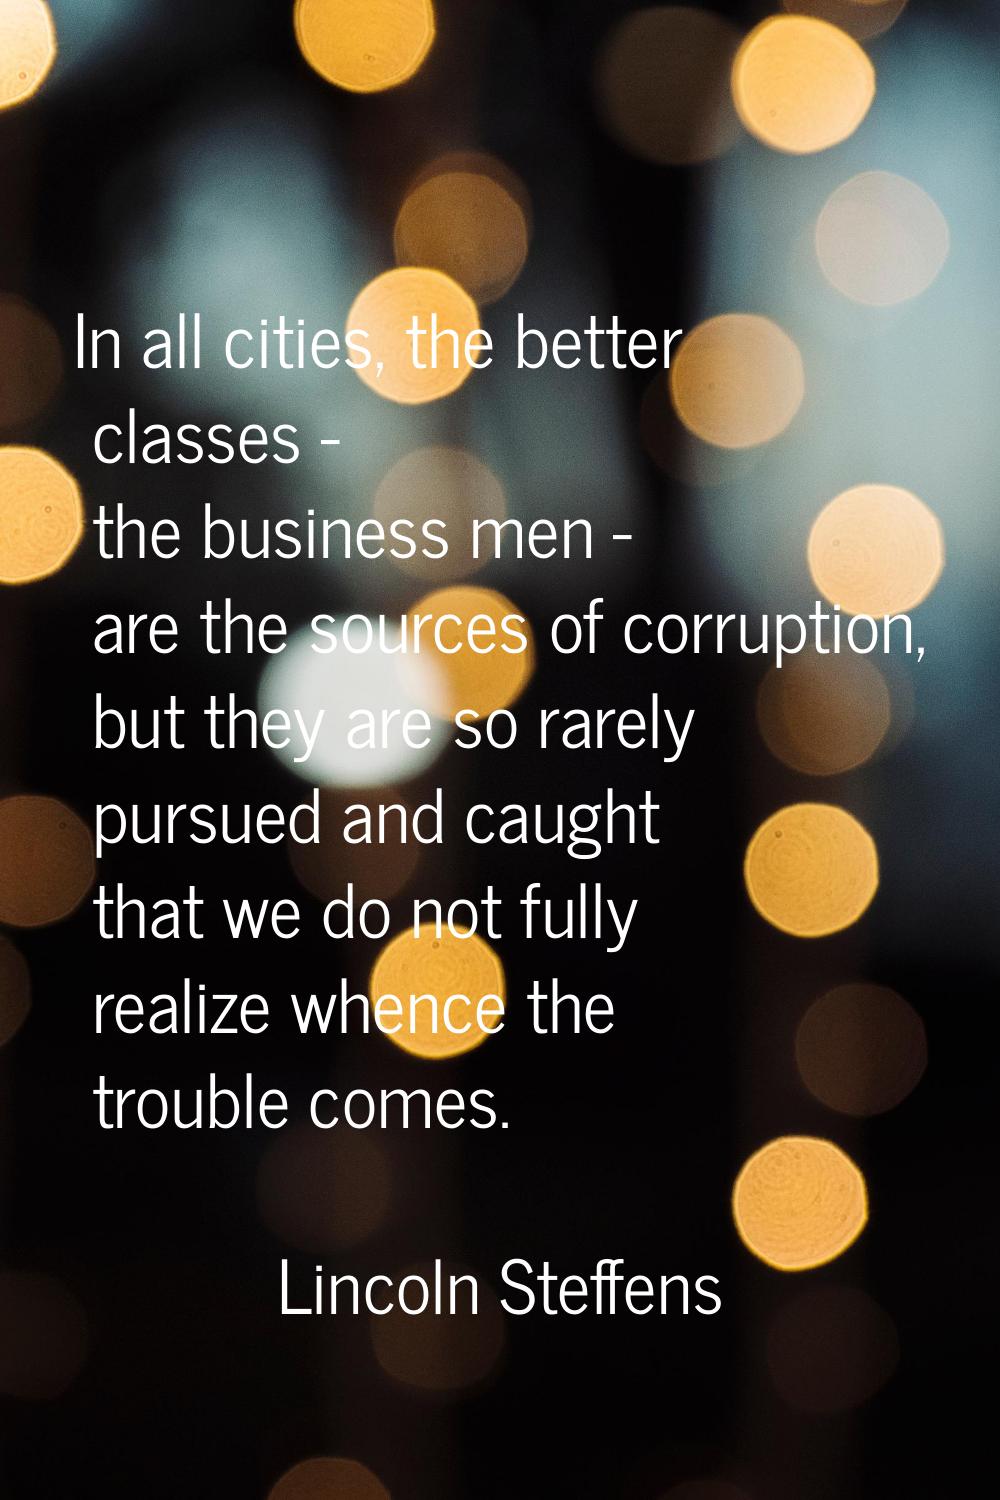 In all cities, the better classes - the business men - are the sources of corruption, but they are 